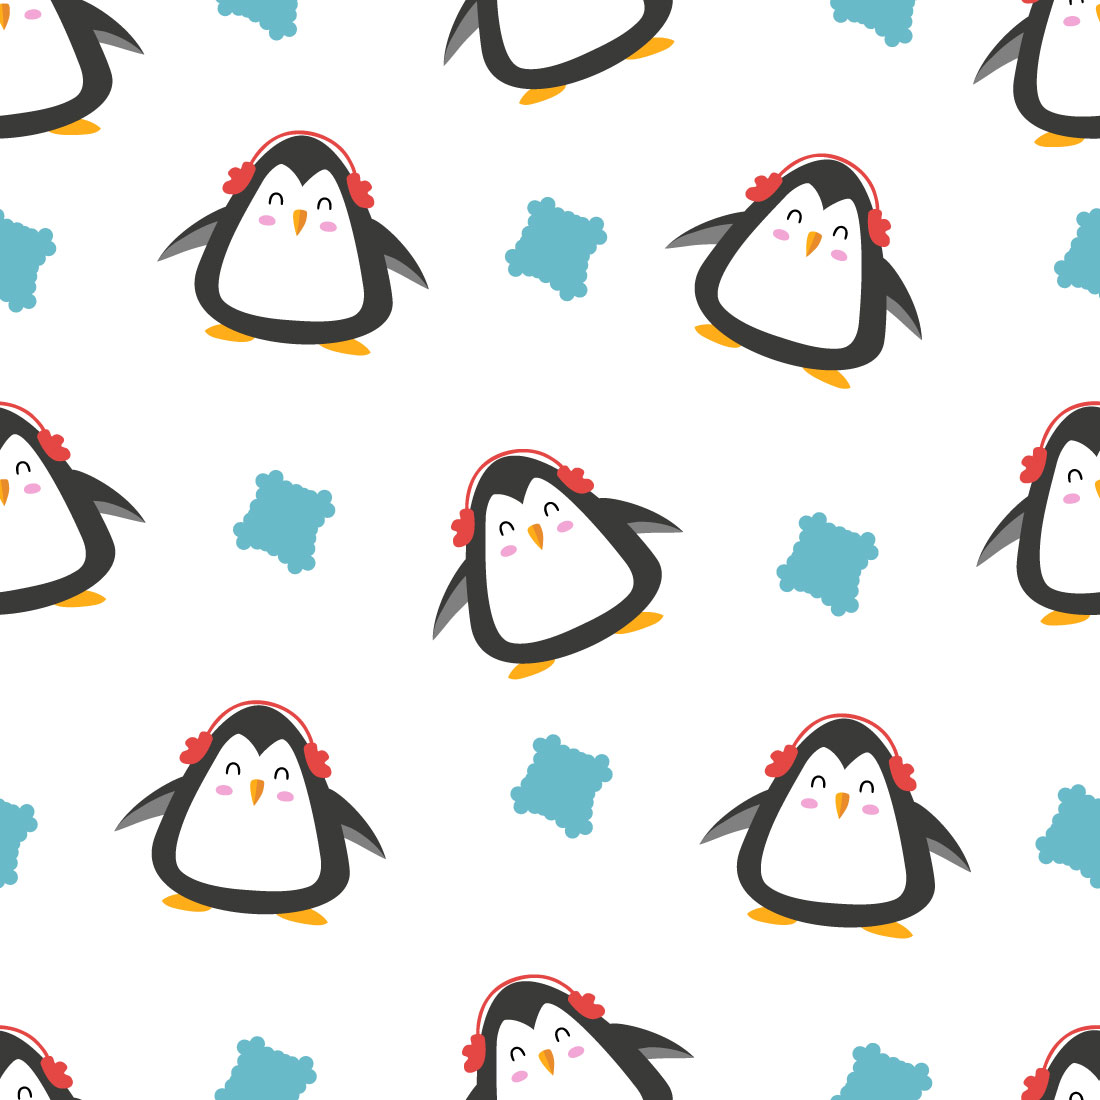 Smiley Penguin Seamless Pattern cover image.